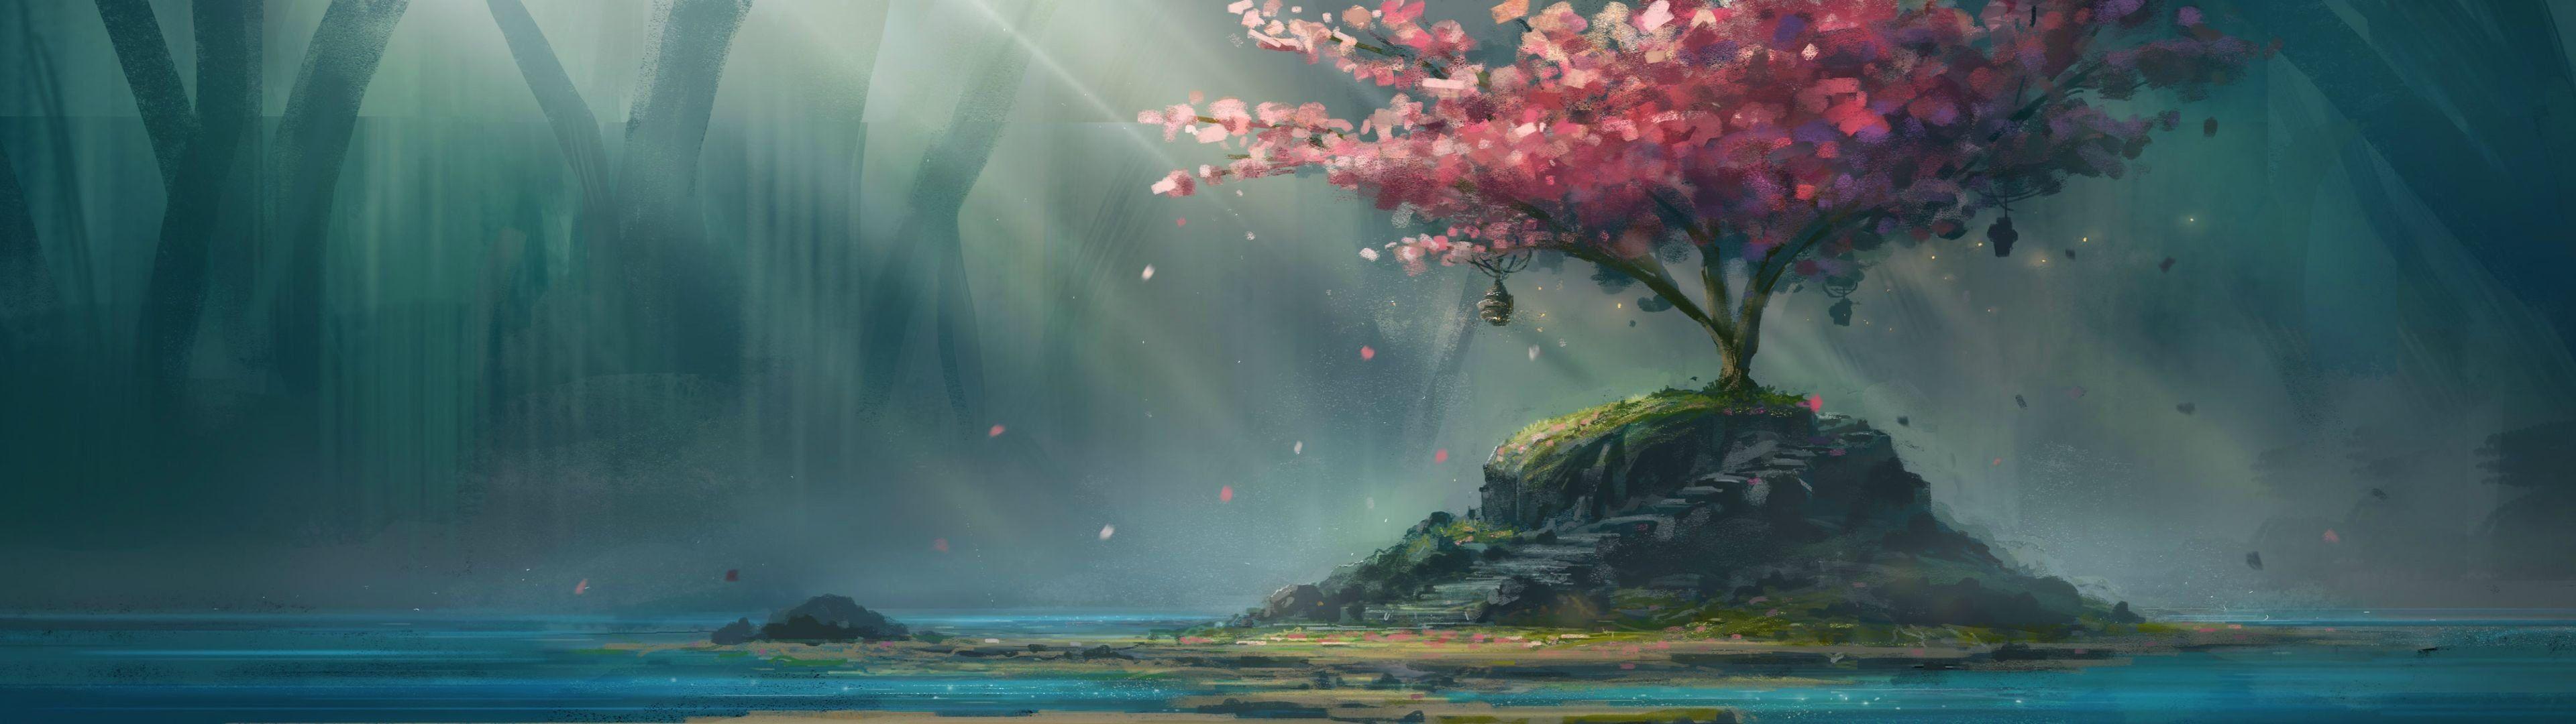 Cherry Blossom Painting Wallpapers Wallpaper Cave